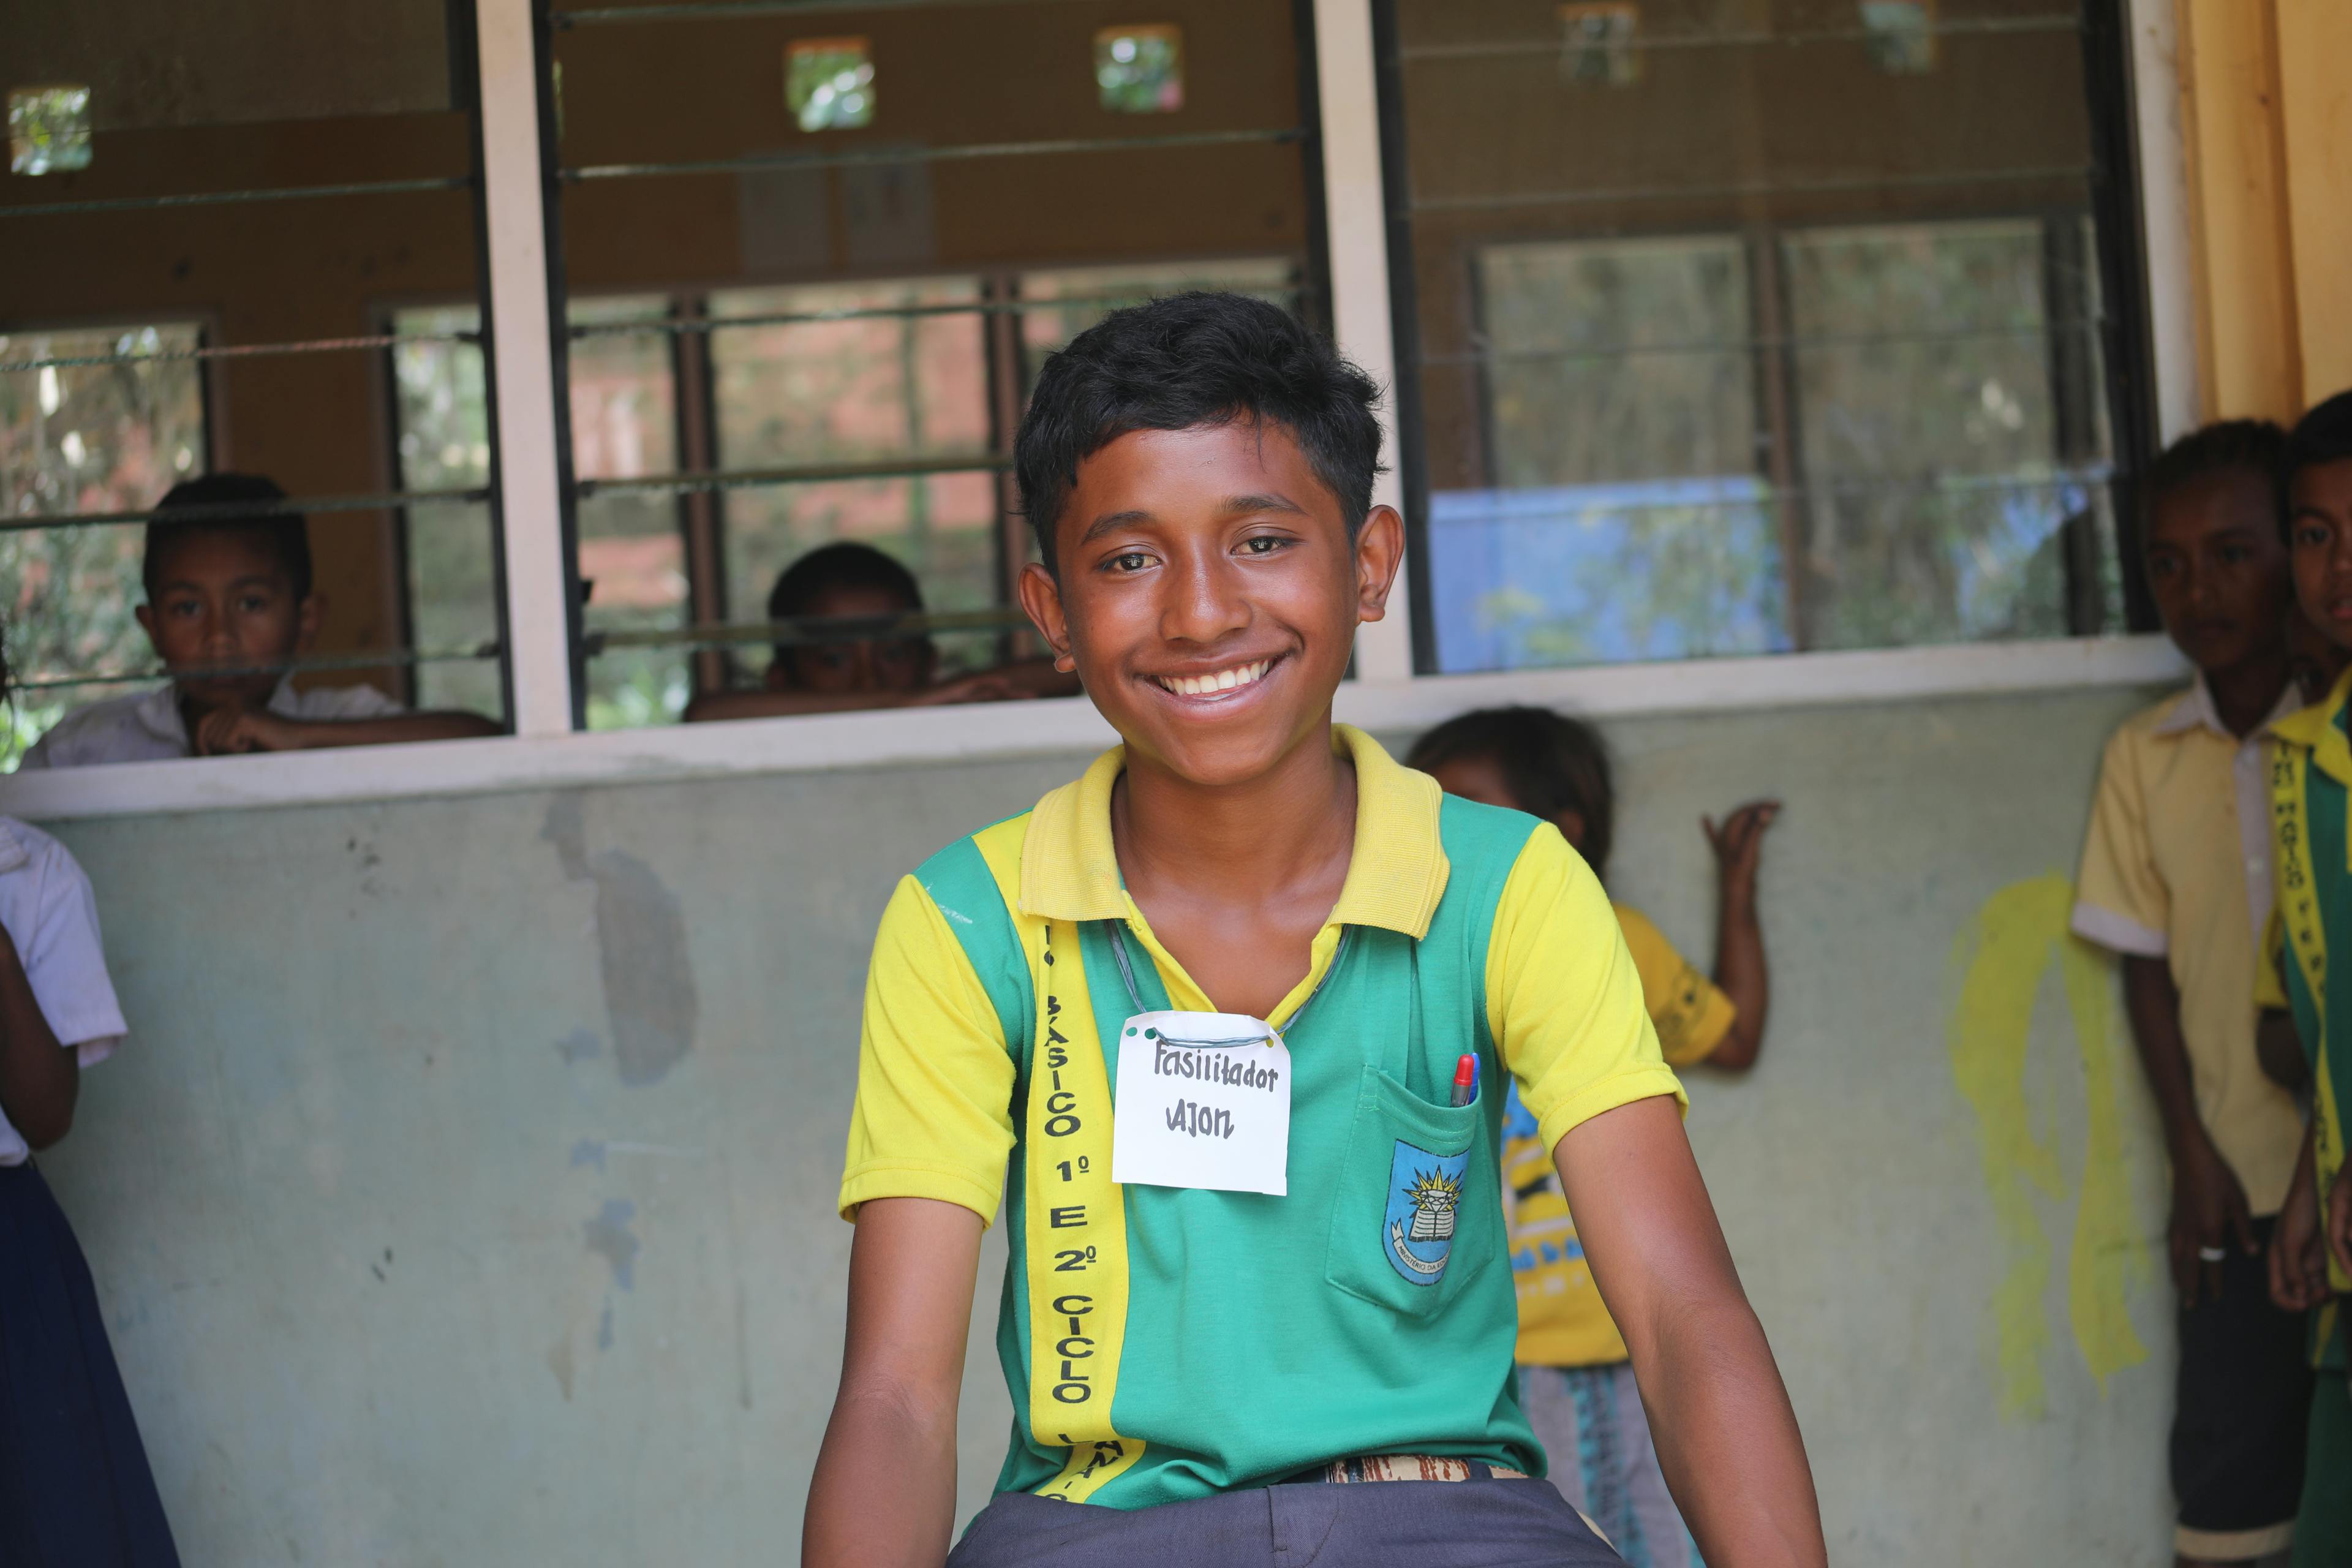 Ajon is in grade 5 and is 12 years old. His favourite school subject is science.